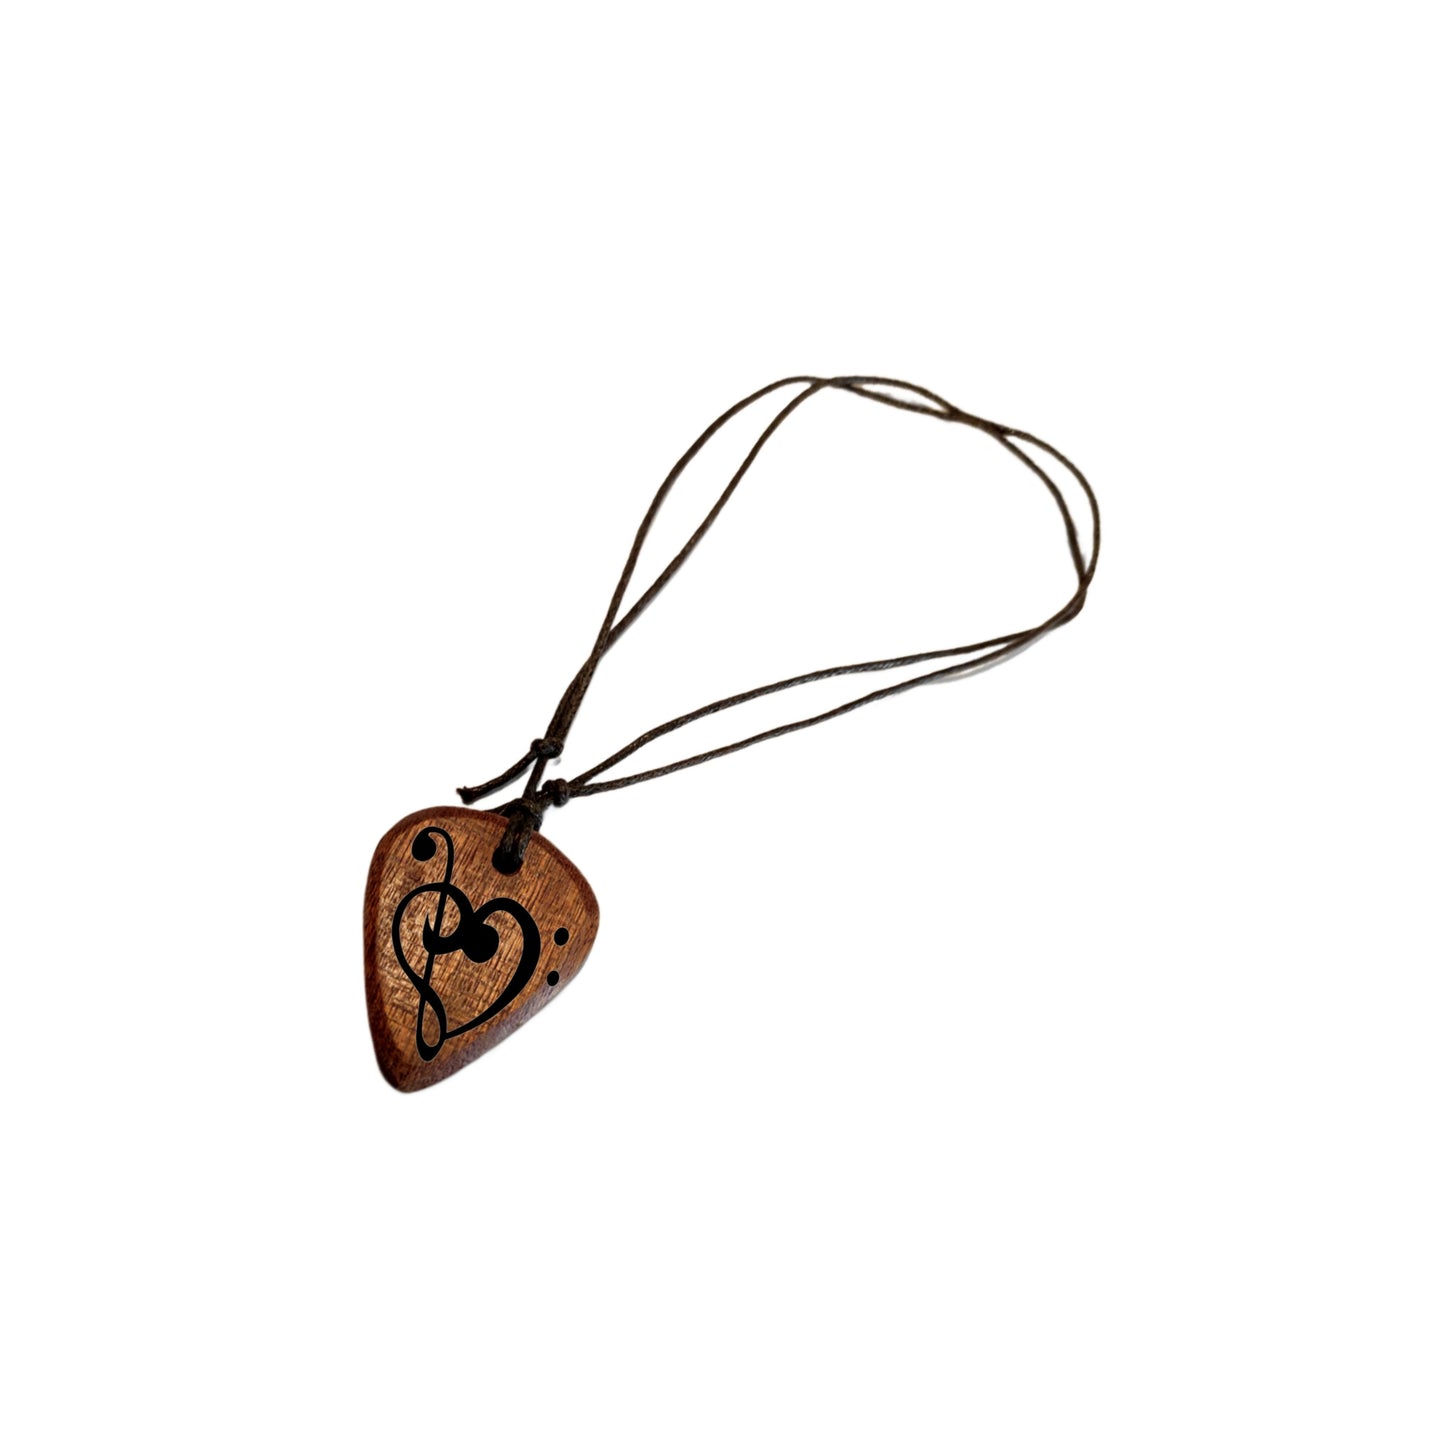 Necklace plectrum of the Musician with the key of violin and bass